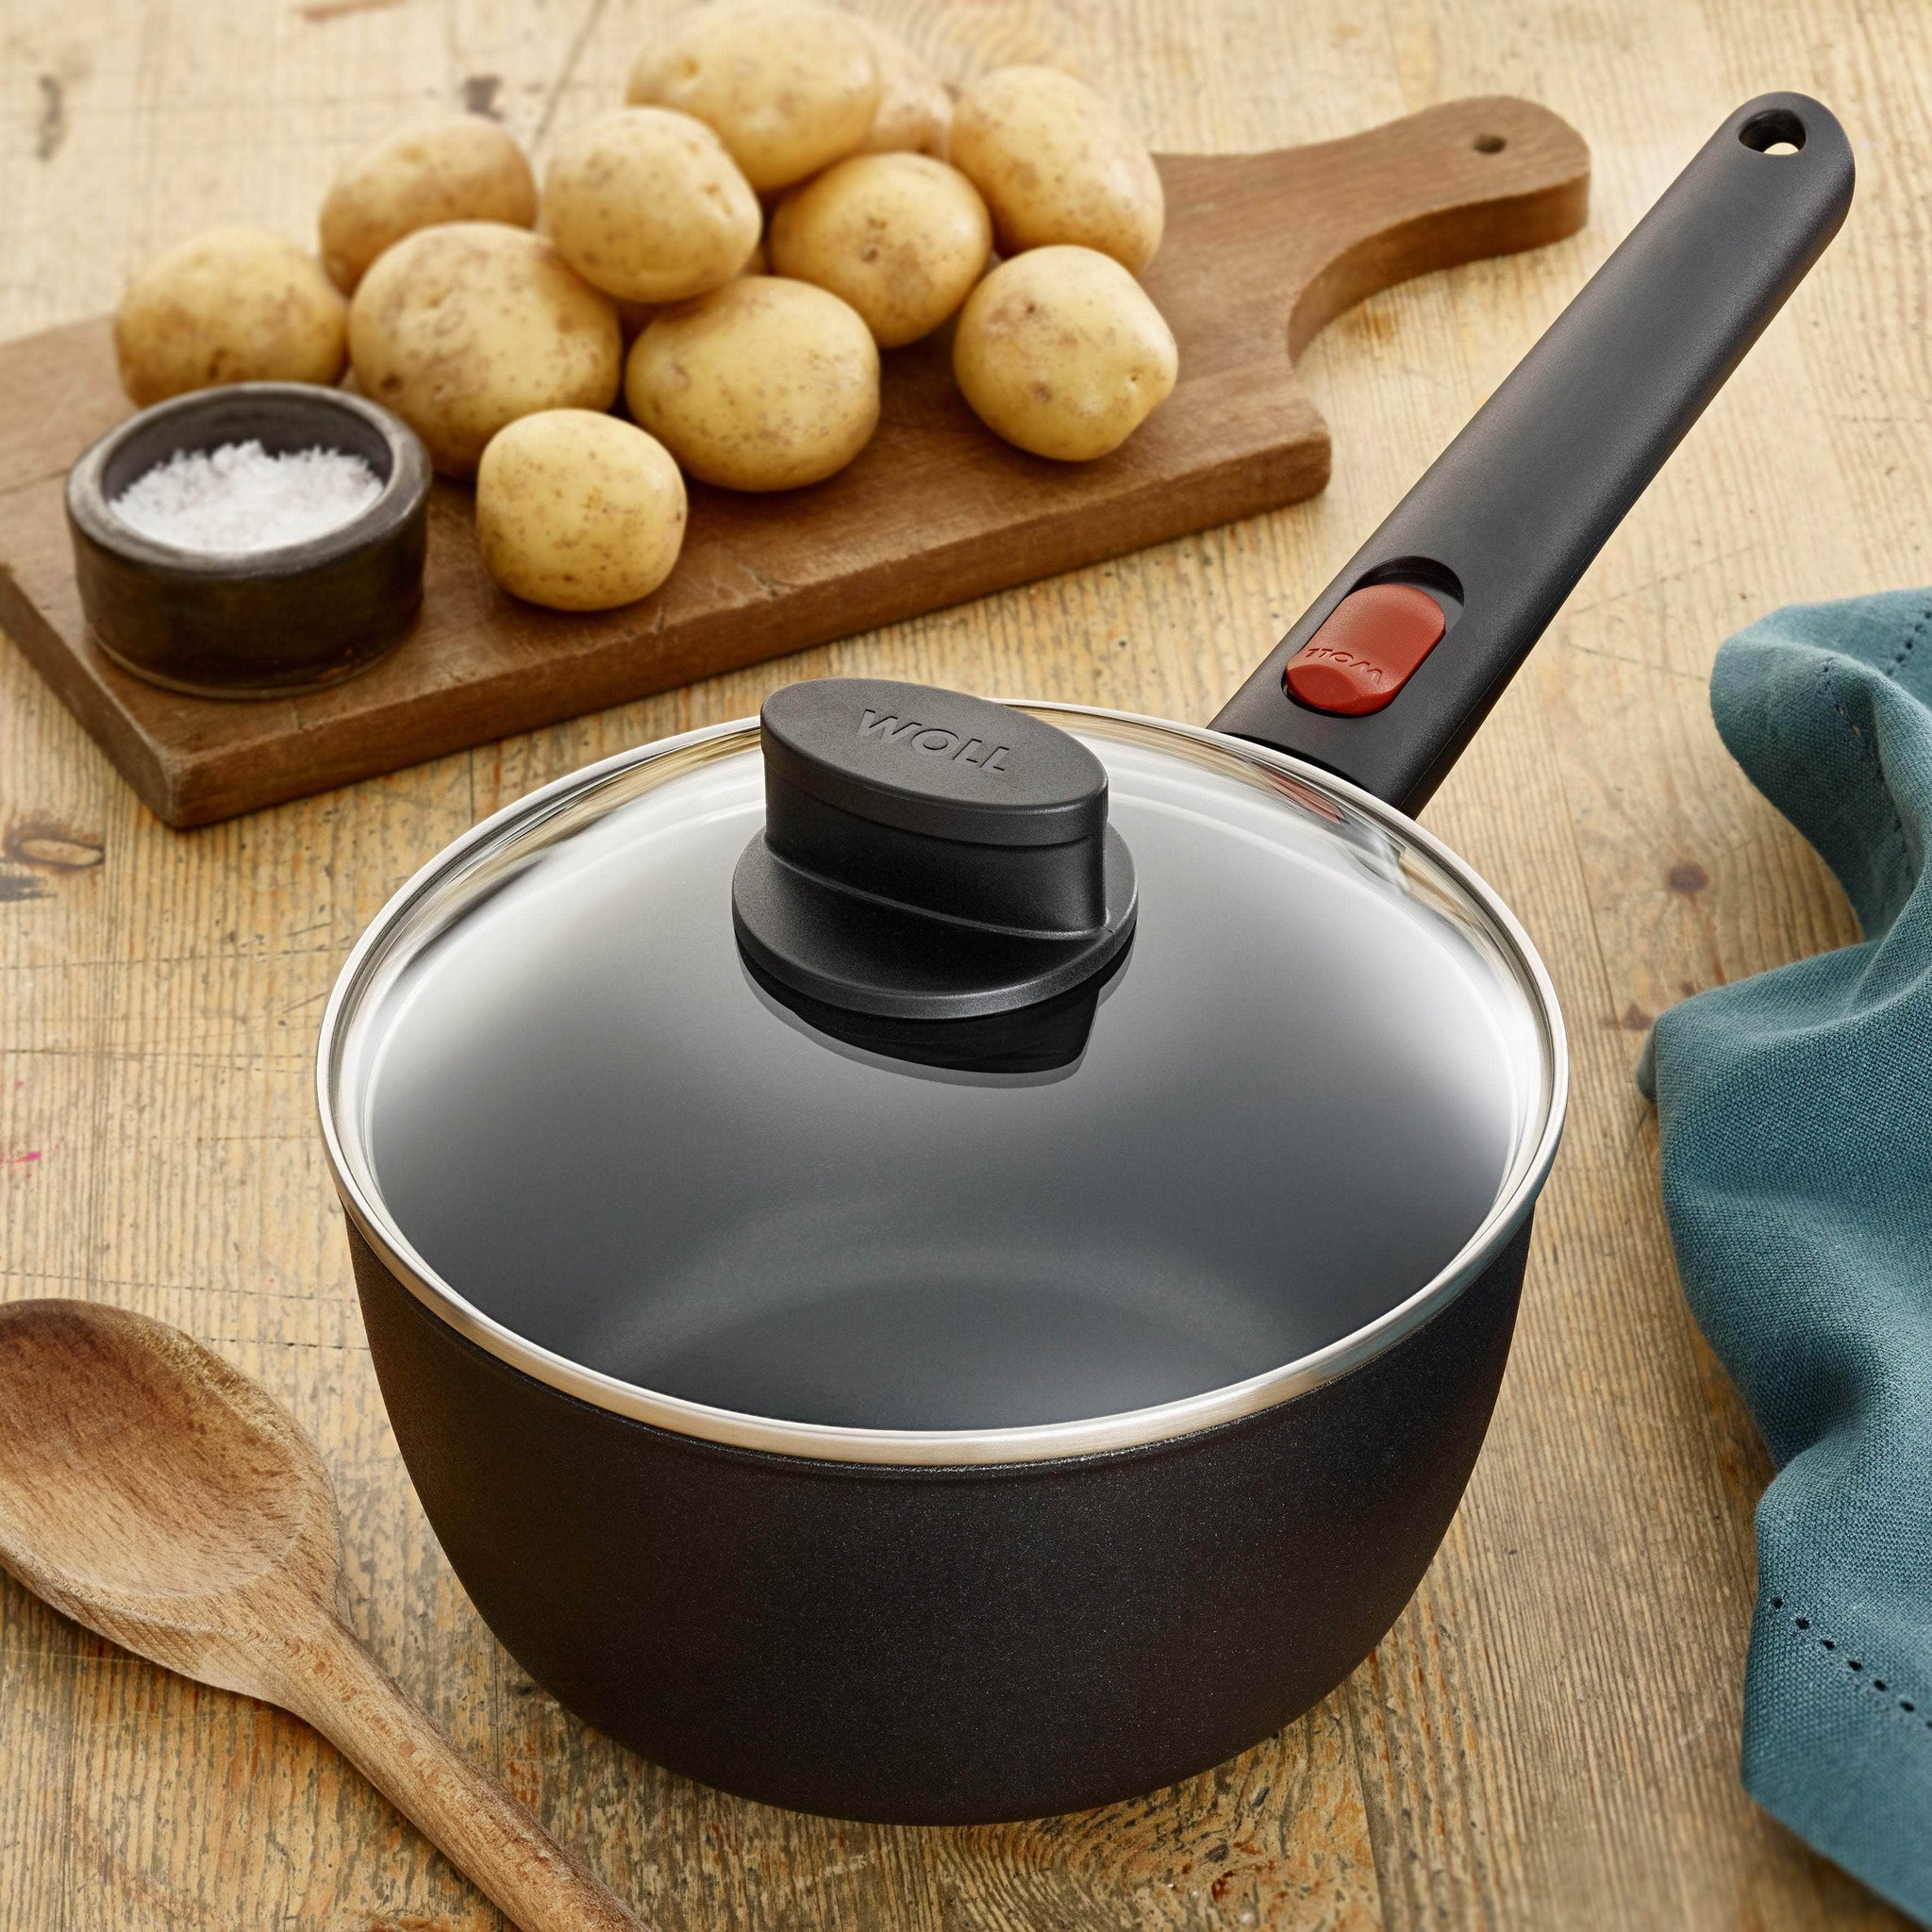 The Best Saucepan for Range Cookers